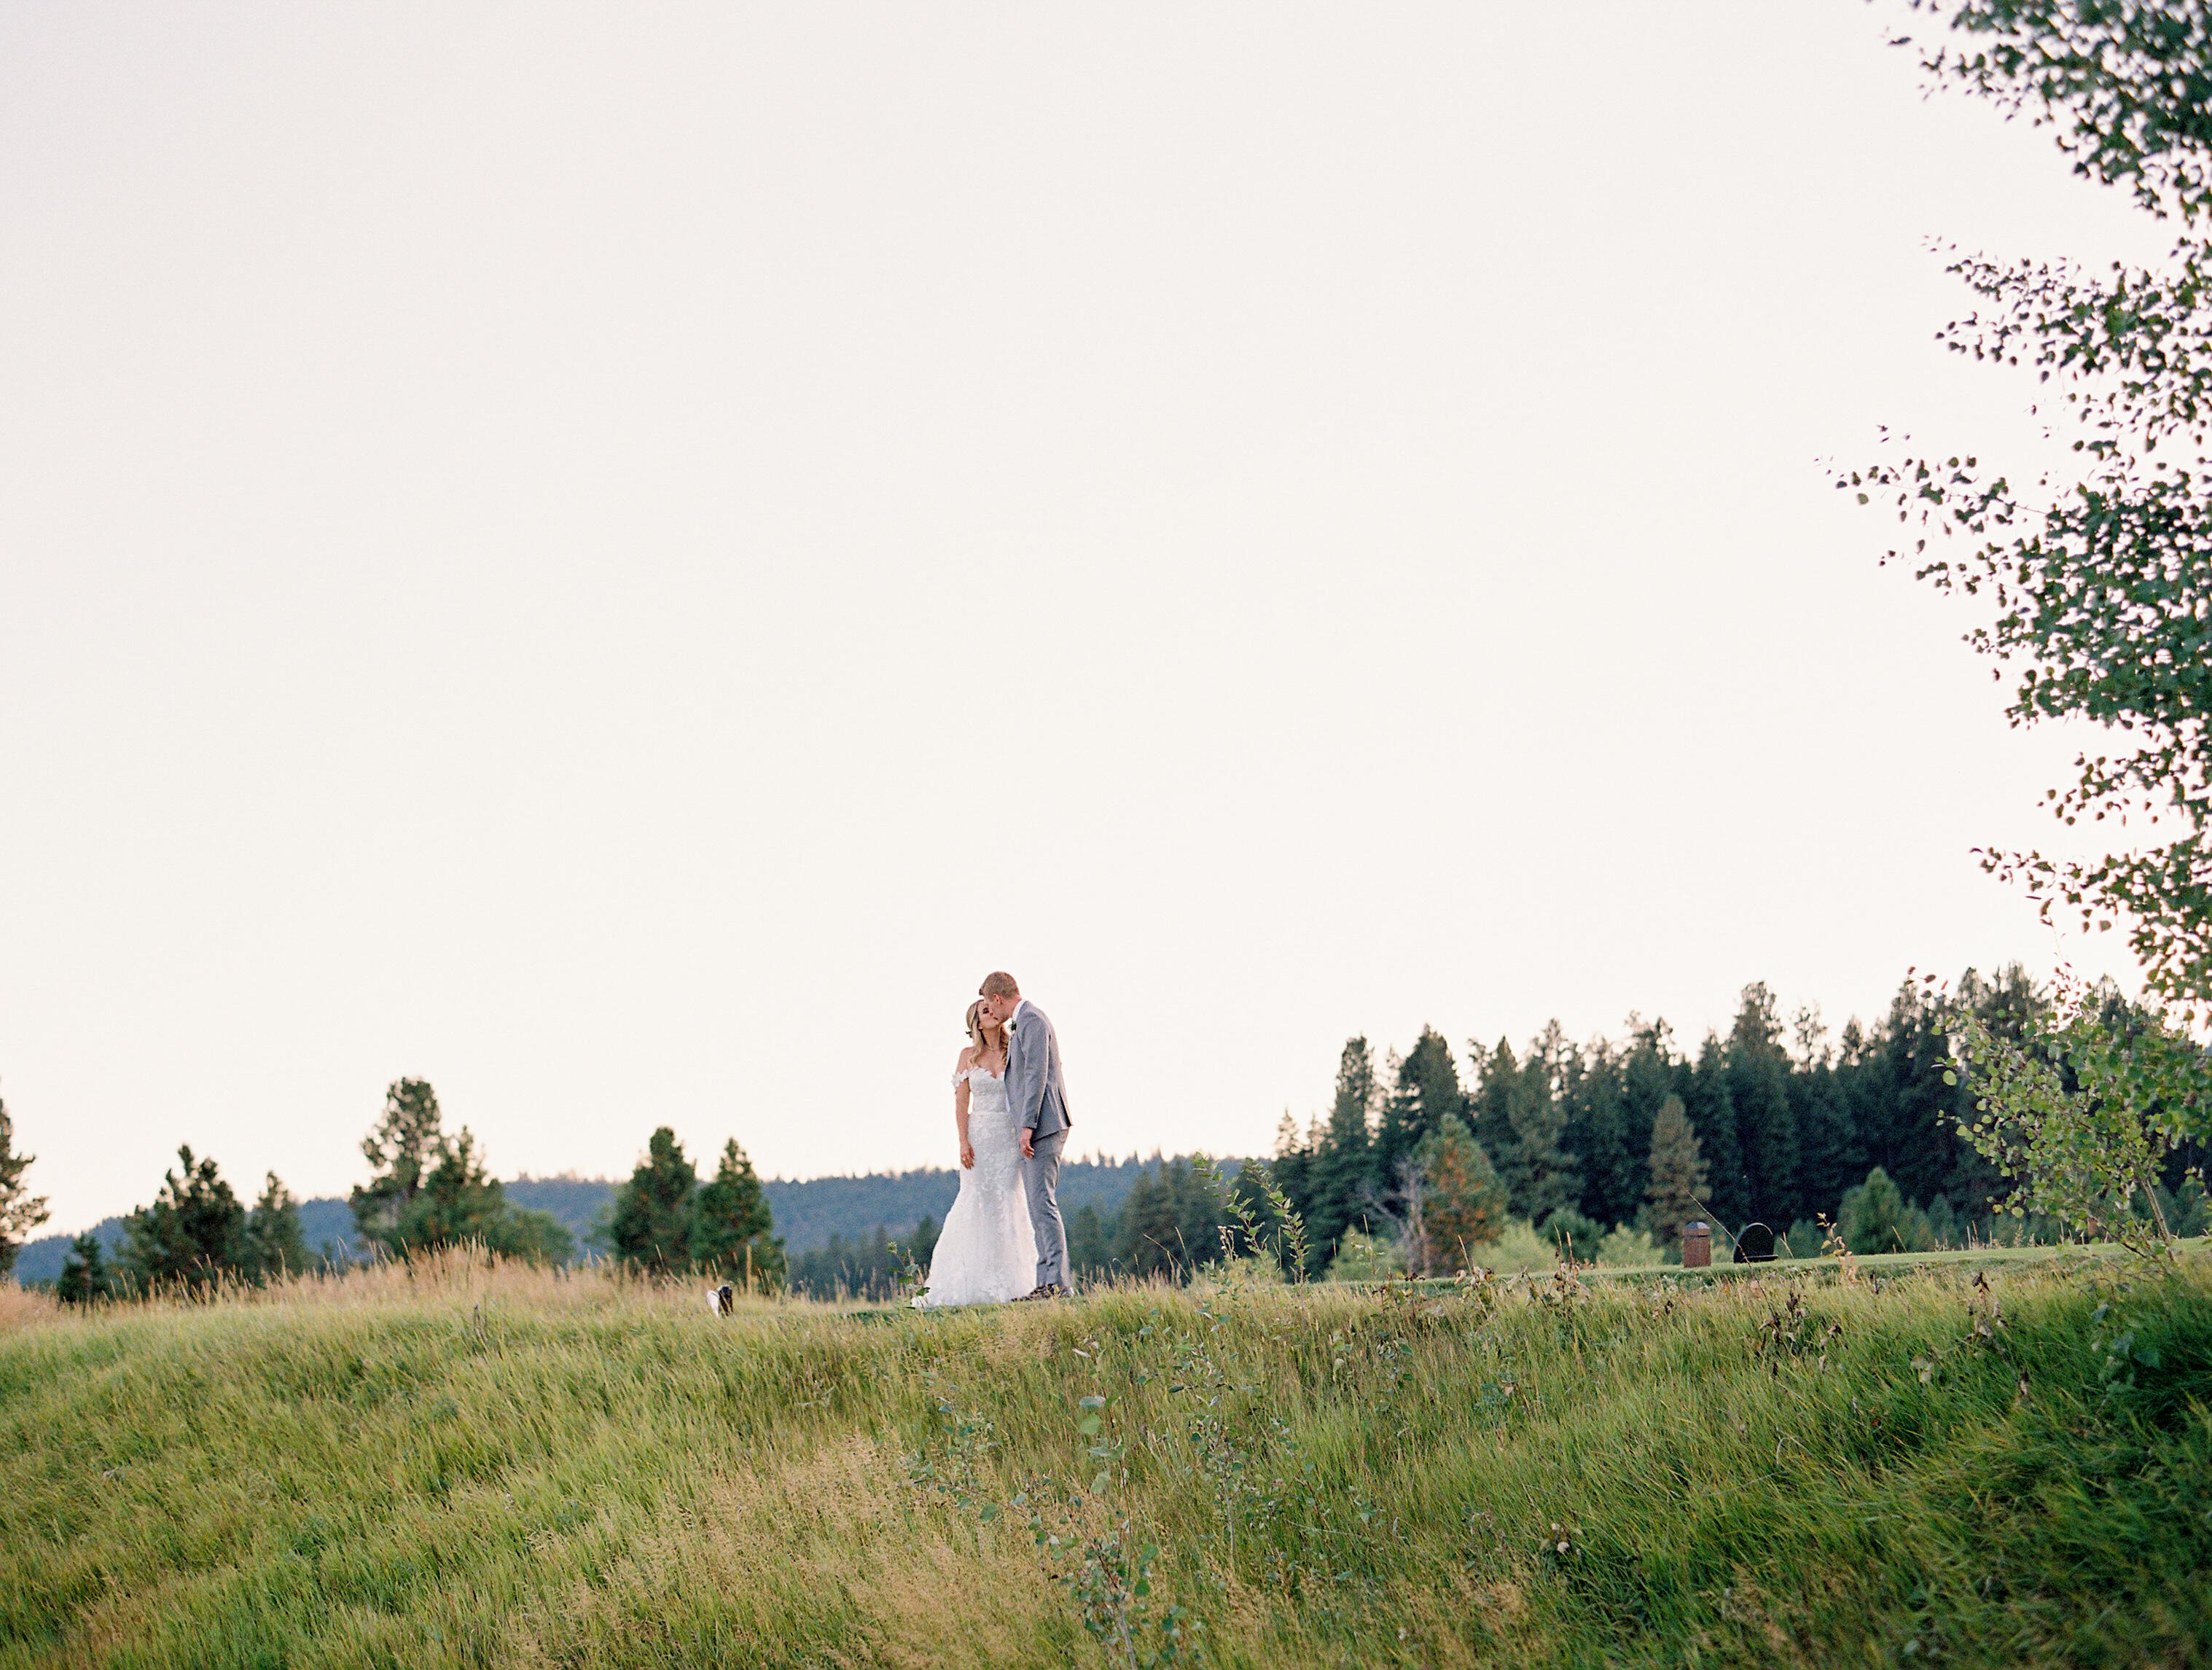 Magical And Meaningful Lakeside Wedding In Idaho